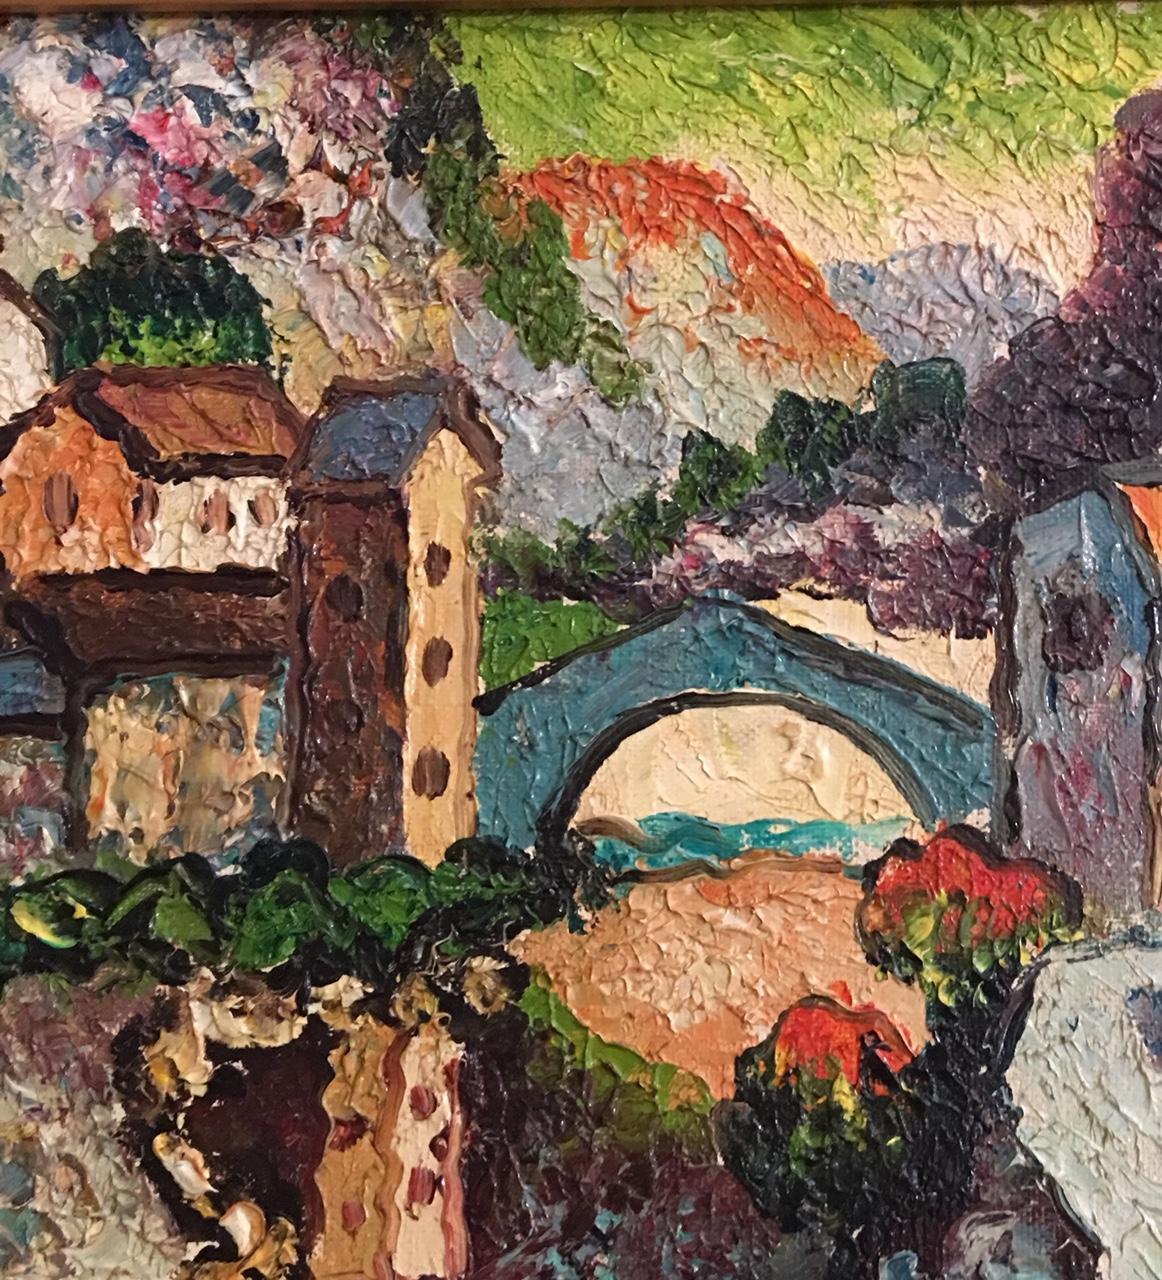 Mountain Village with Bridge over Stream - Painting by Unknown